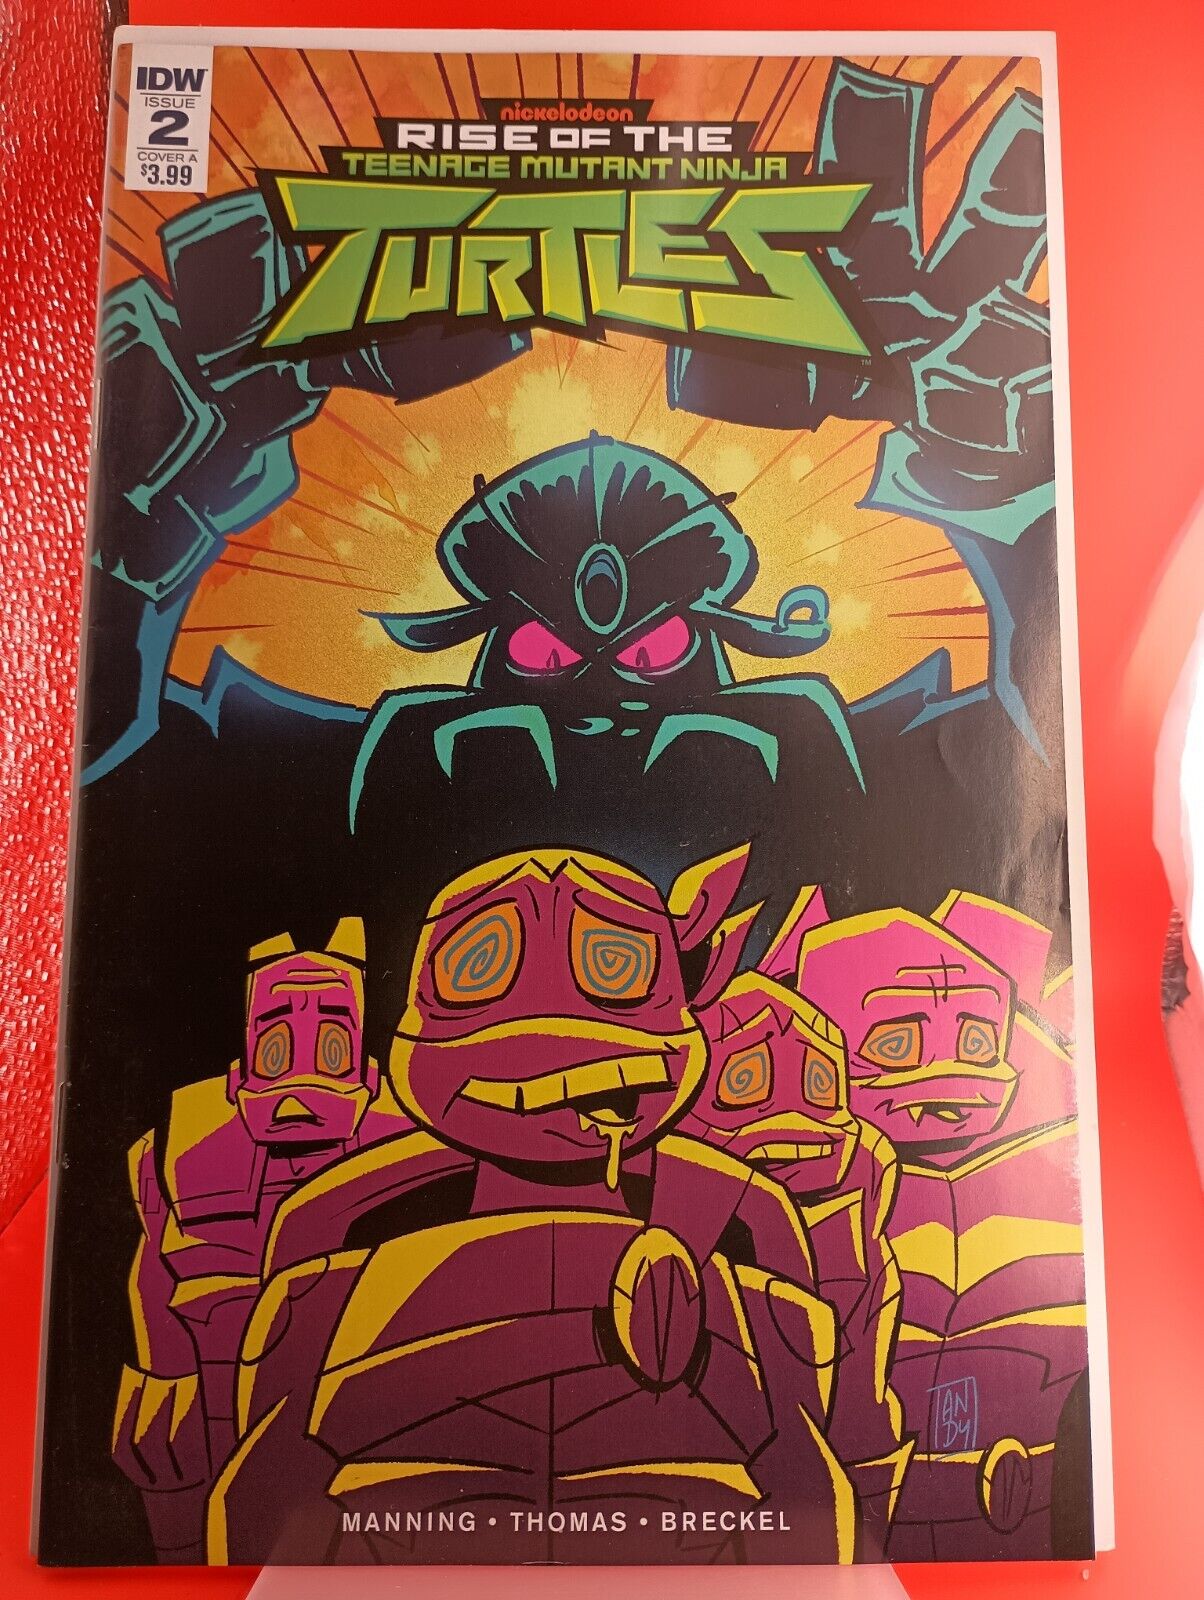 2019 IDW Comics Rise Teenage Mutant Ninja Turtles 2 Andy Suriano Cover A Variant